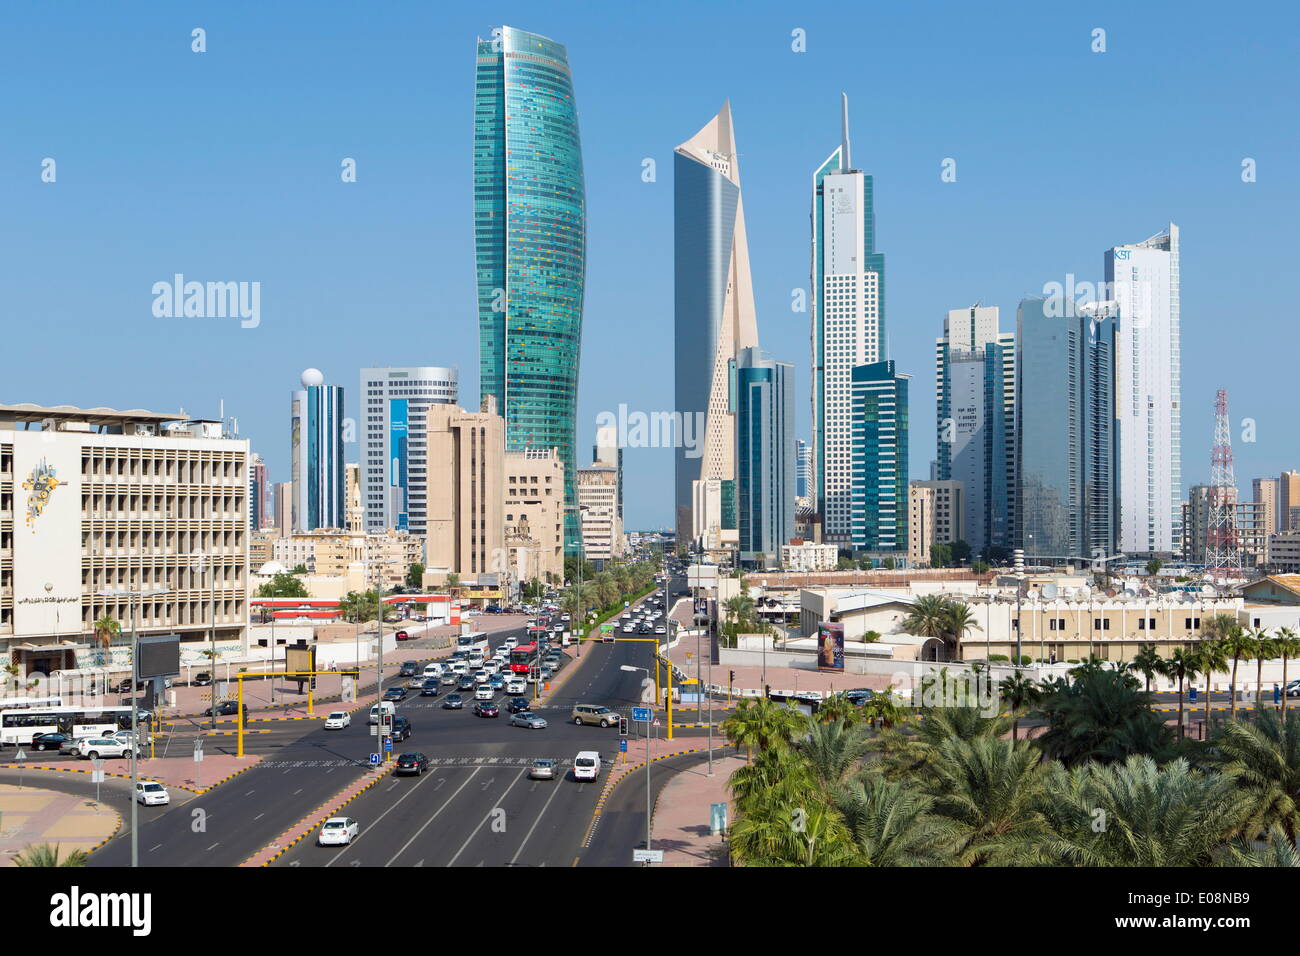 Elevated view of the modern city skyline and central business district, Kuwait City, Kuwait, Middle East Stock Photo